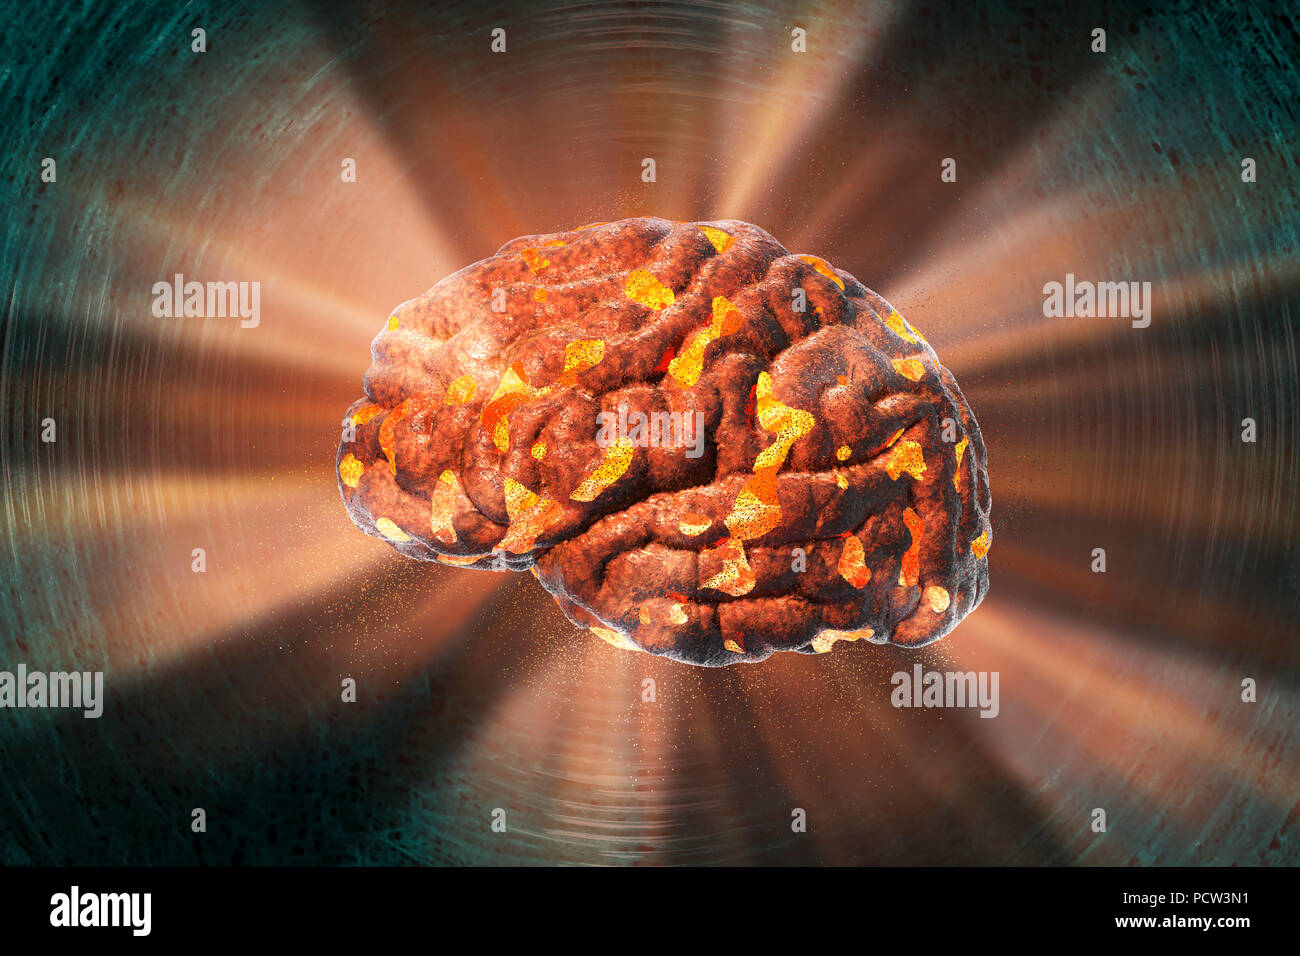 Exploding brain. Conceptual computer illustration of a human brain exploding. This image could represent mental stress or complex thought processes leading to brain overload. Stock Photo